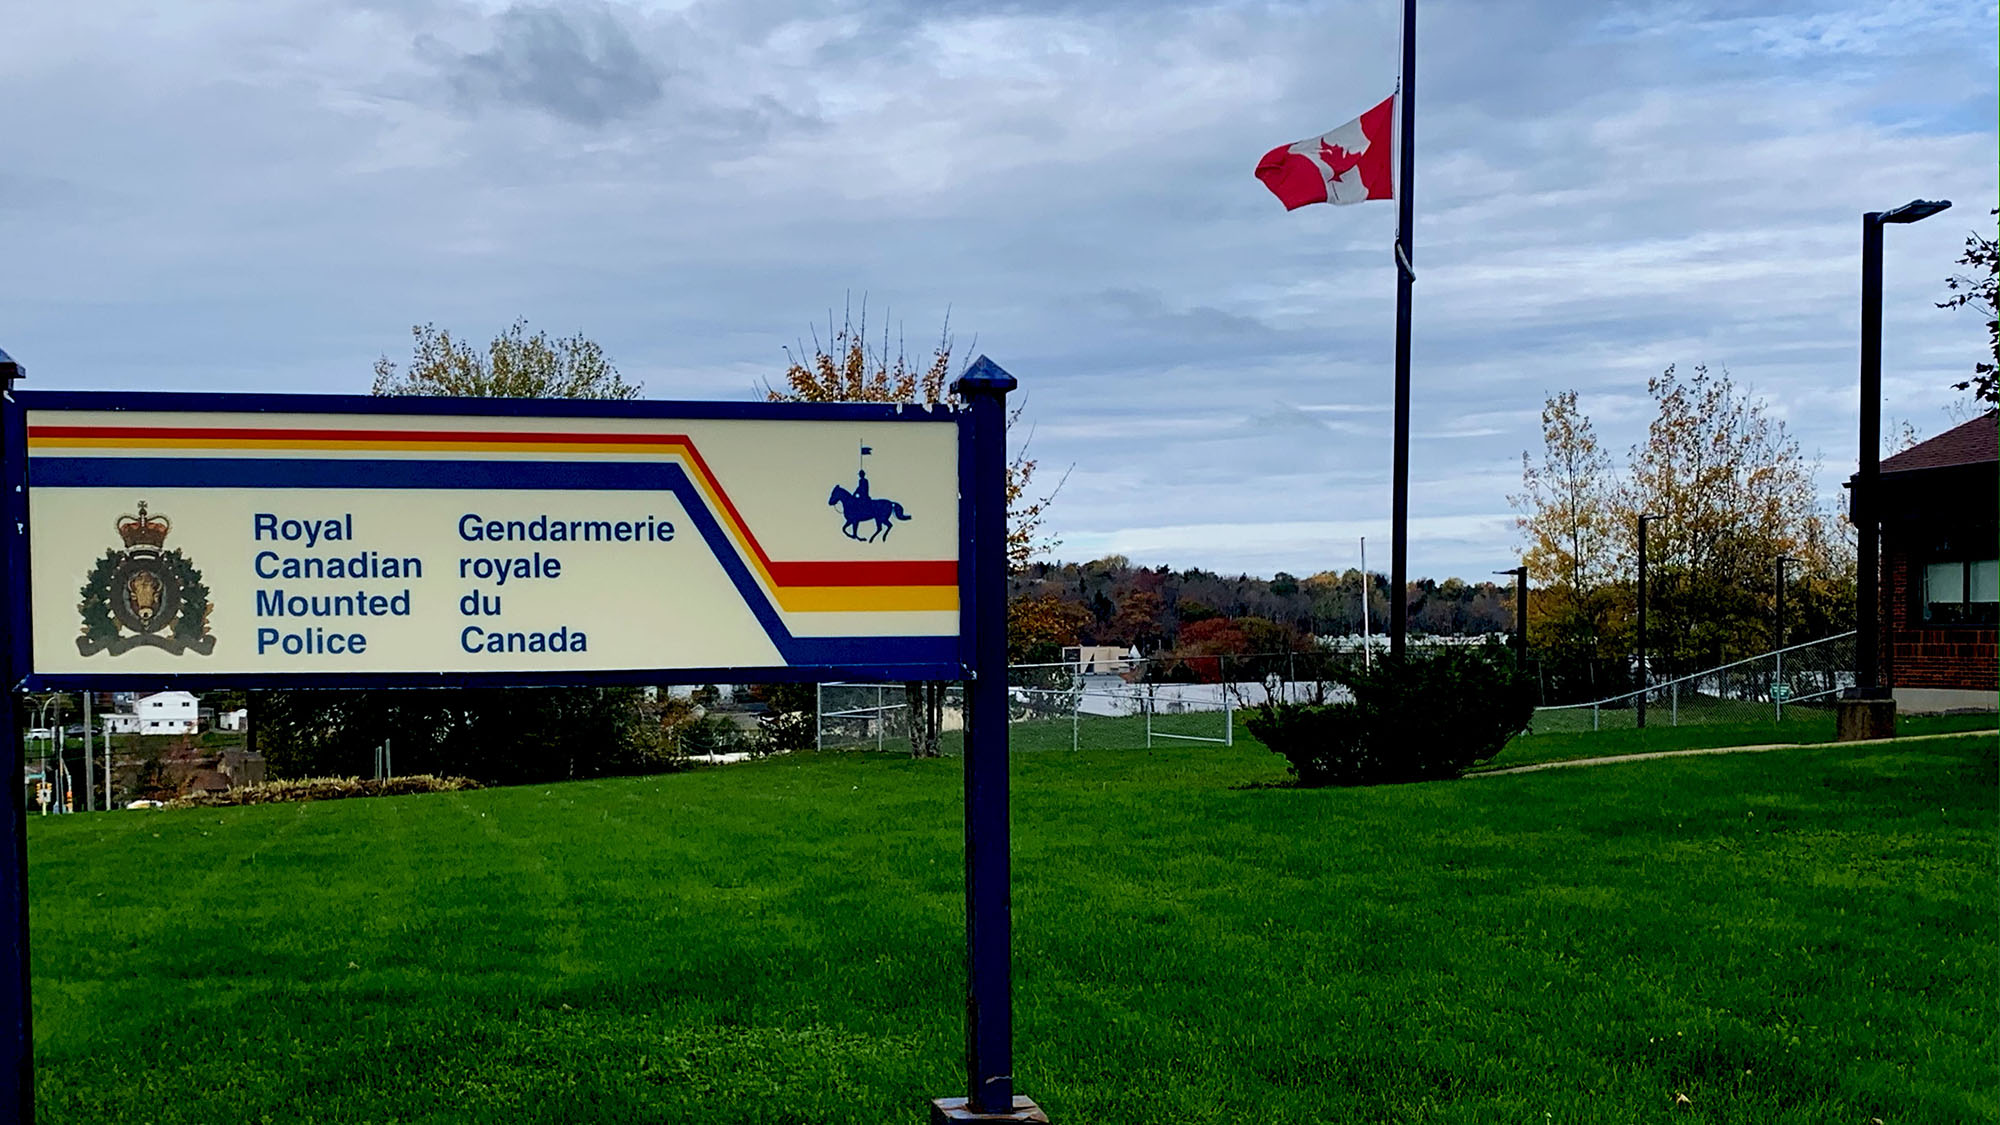 The RCMP sign in Lower Sackville.